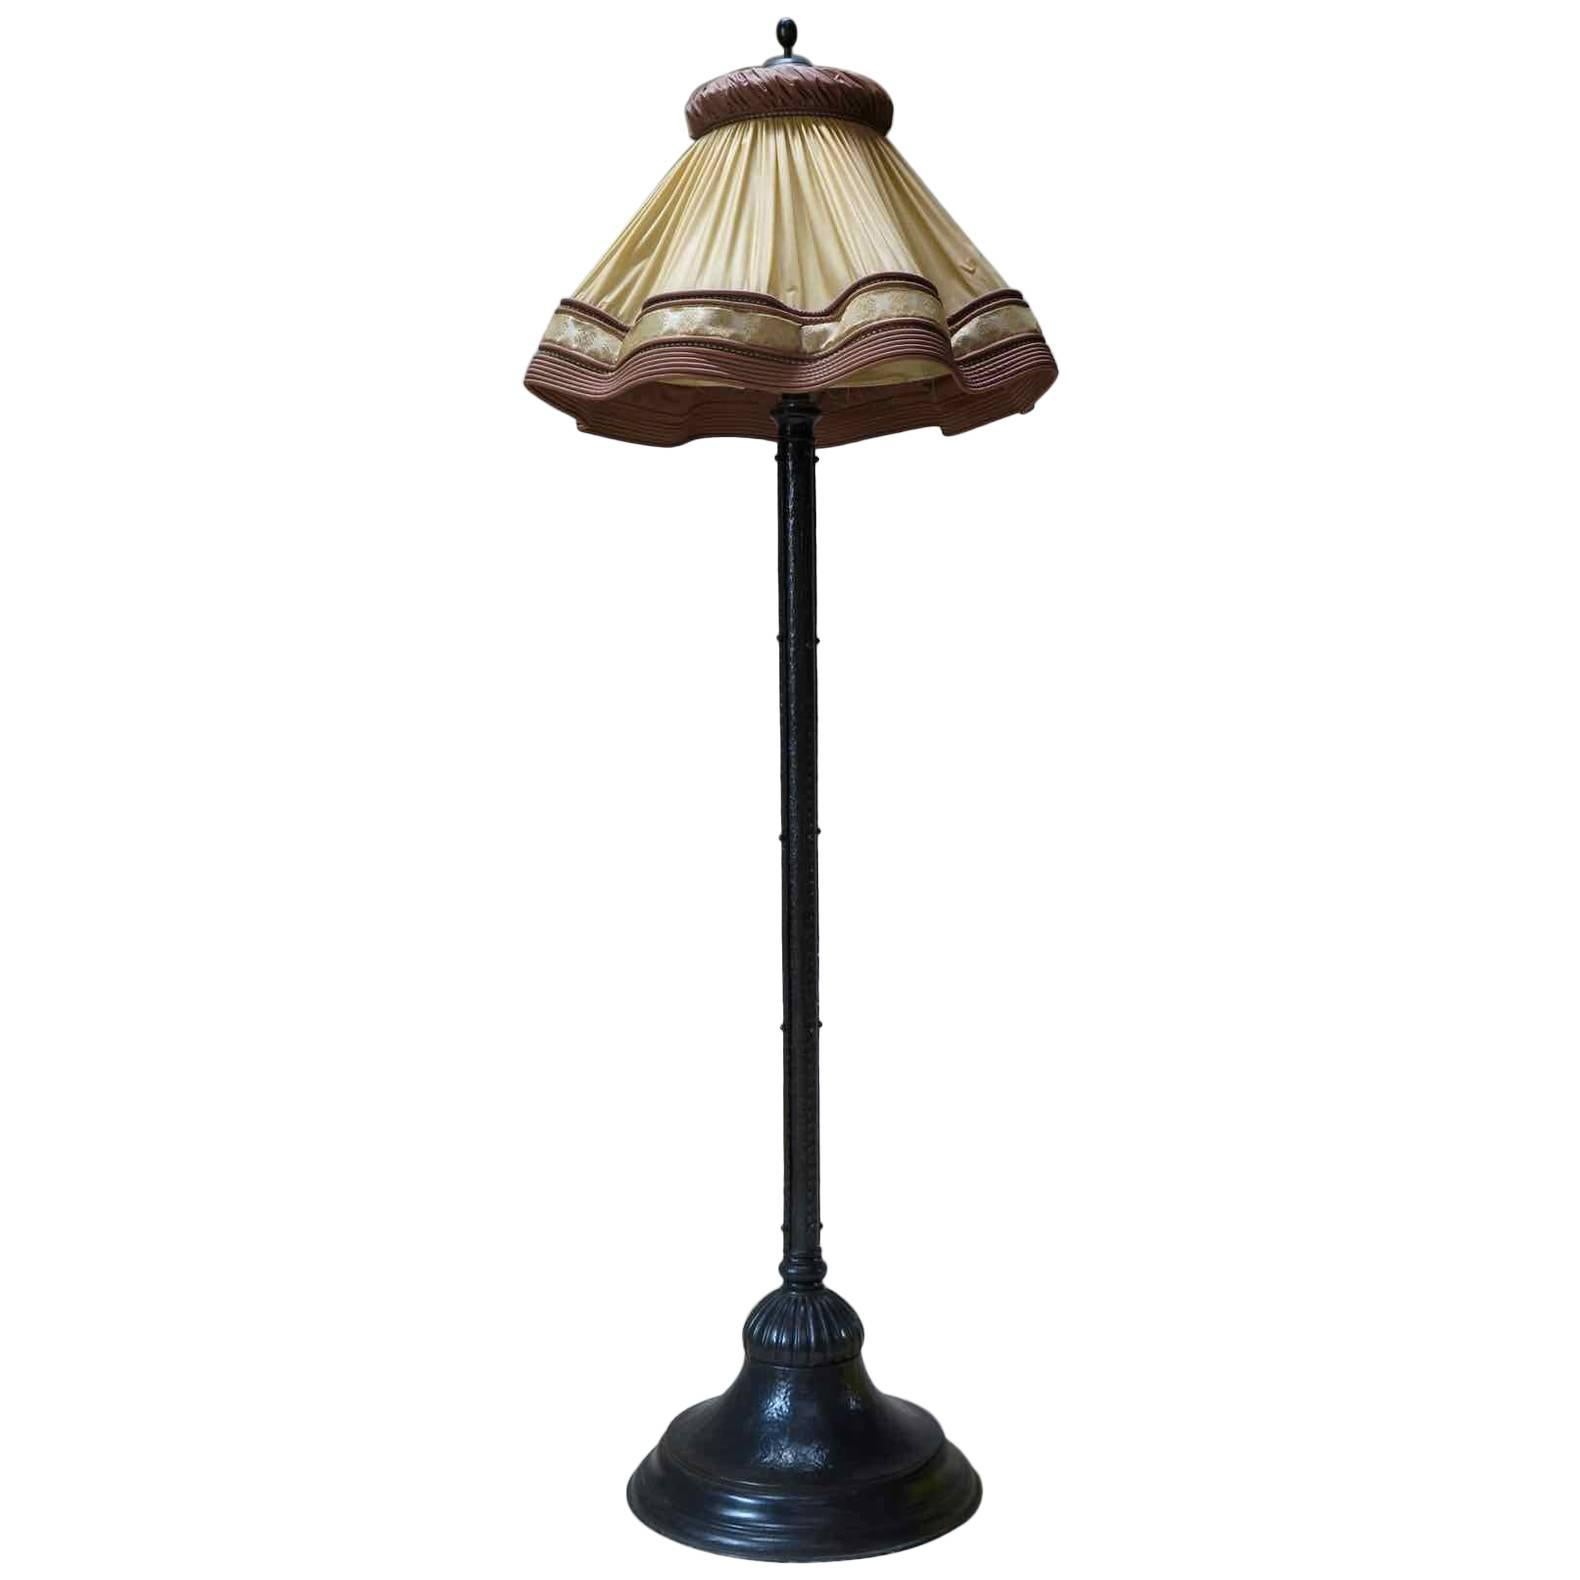 1930s Hammered Iron Floor Lamp with Large Plastic Shade For Sale at 1stDibs  | 1930s lamp shades, 1930s lamps, 1930 lamp